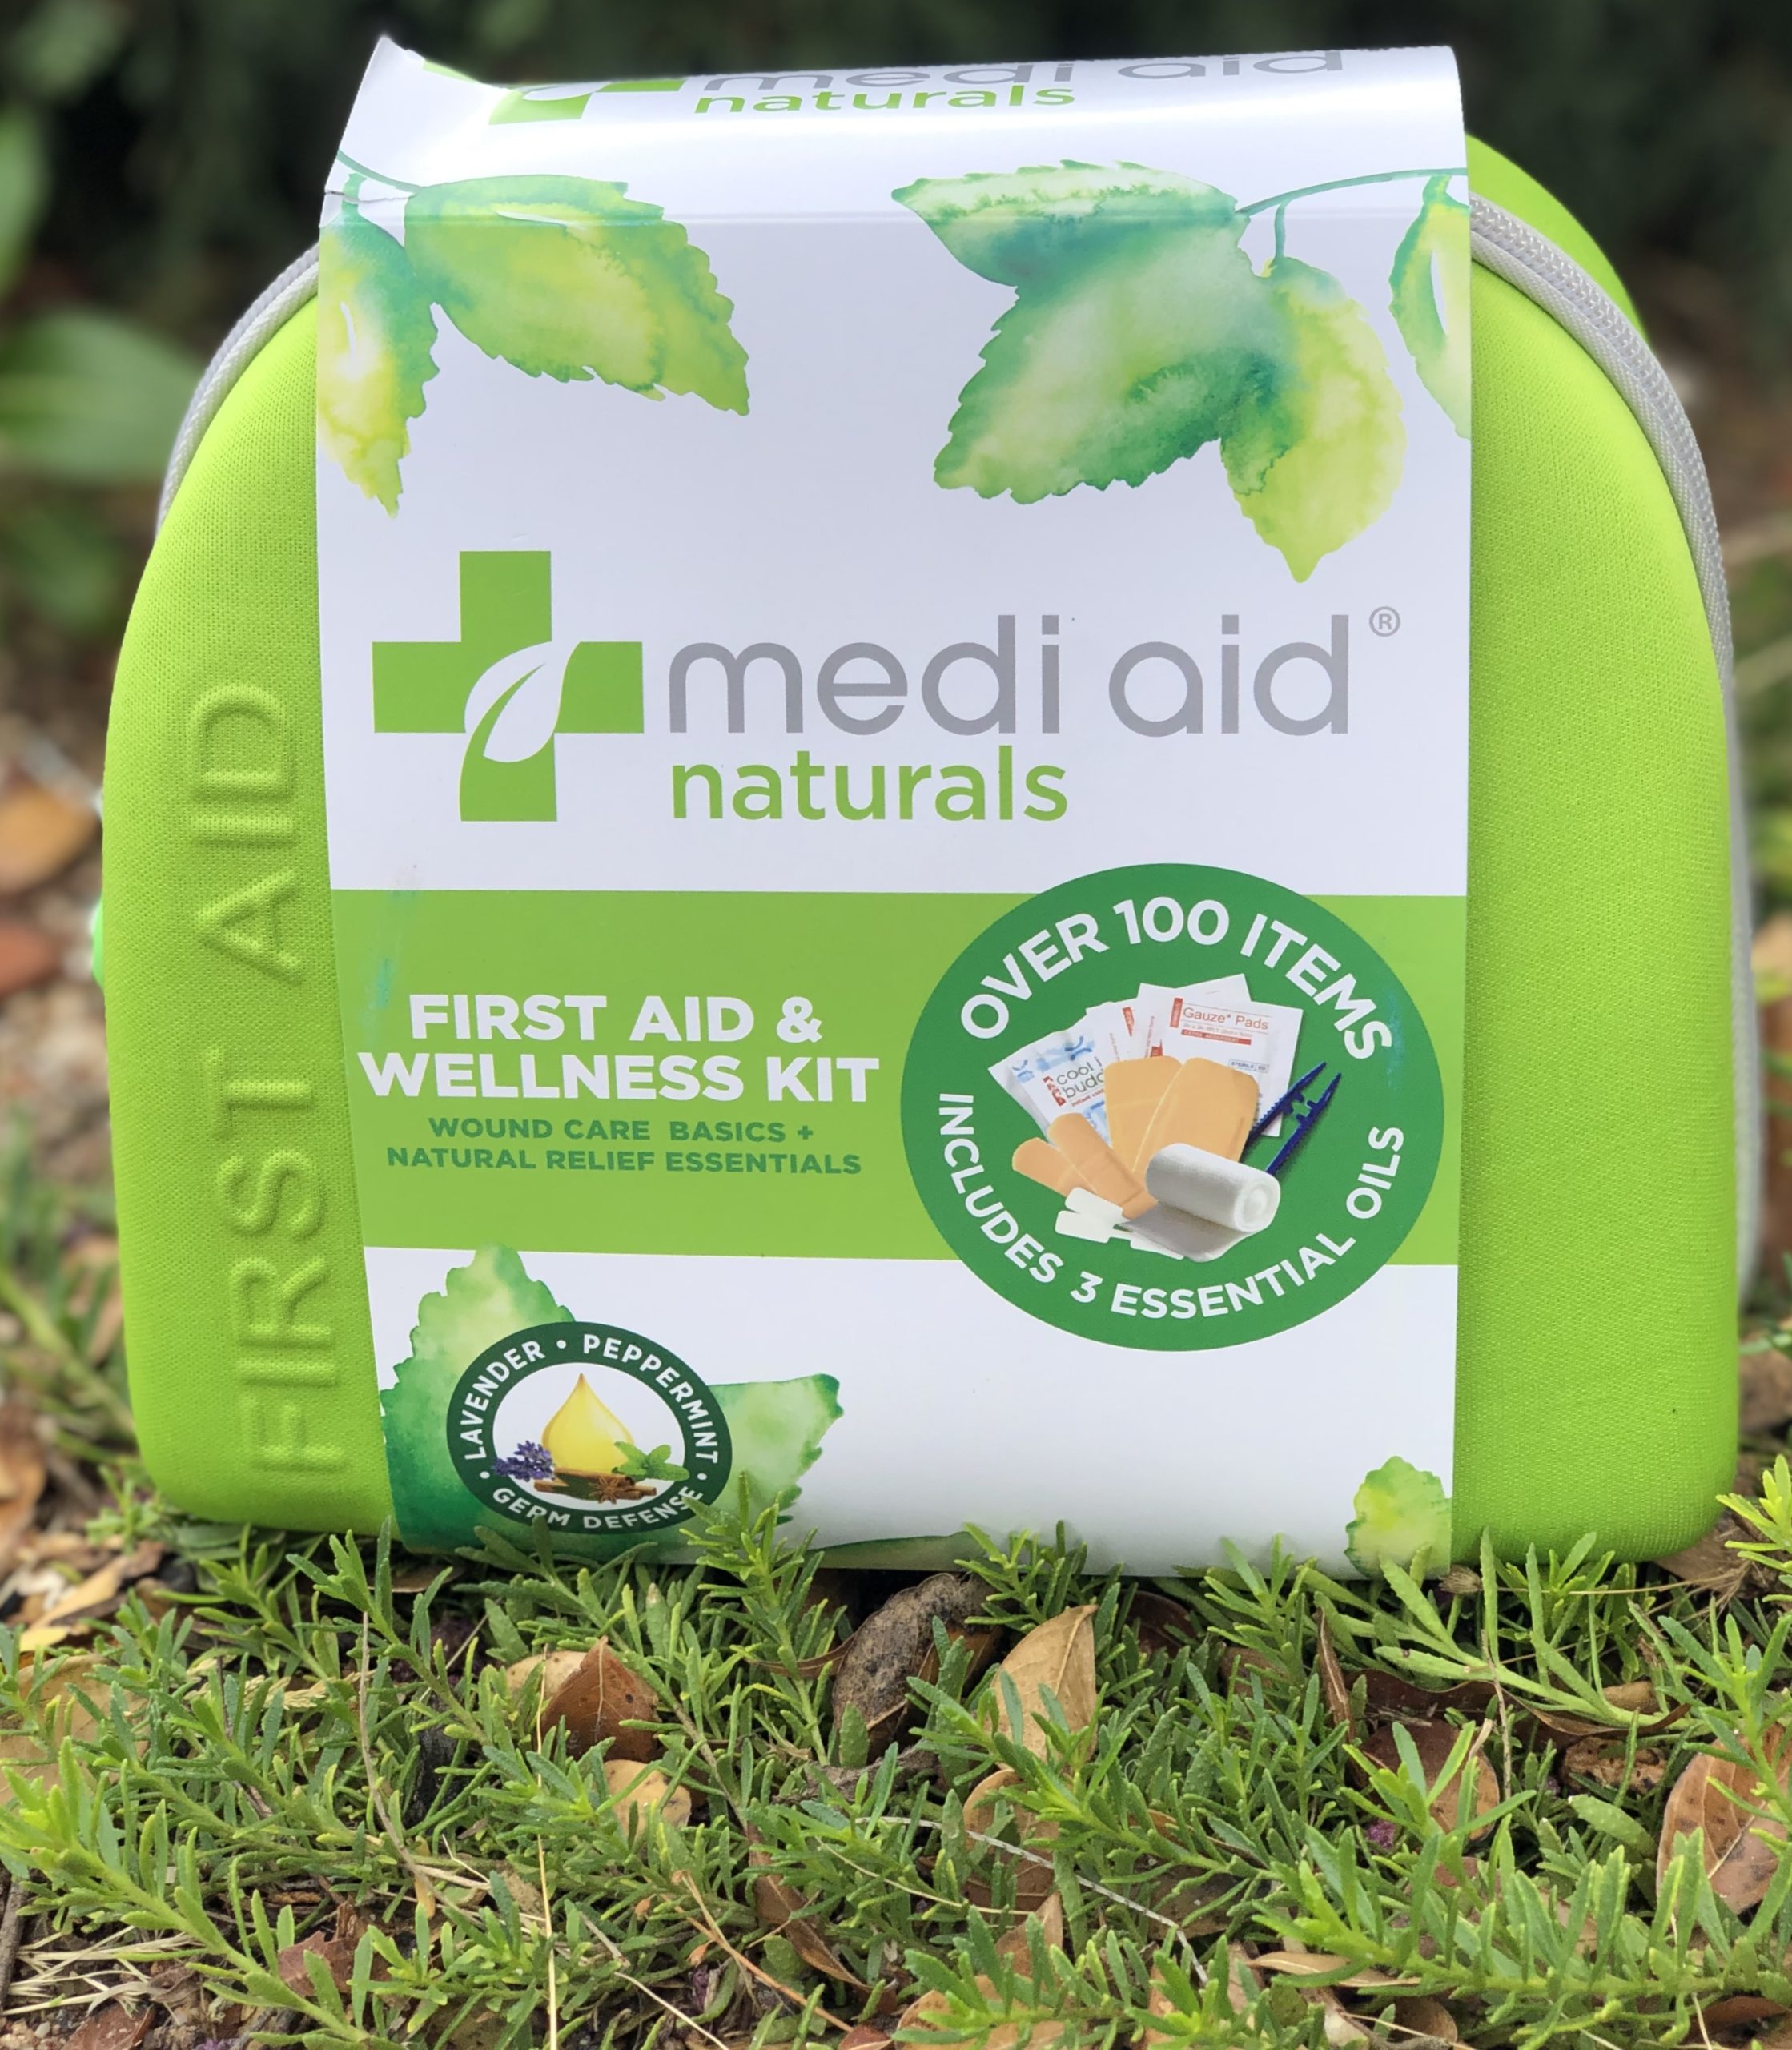 medi aid naturals first aid wellness kit camping outdoors